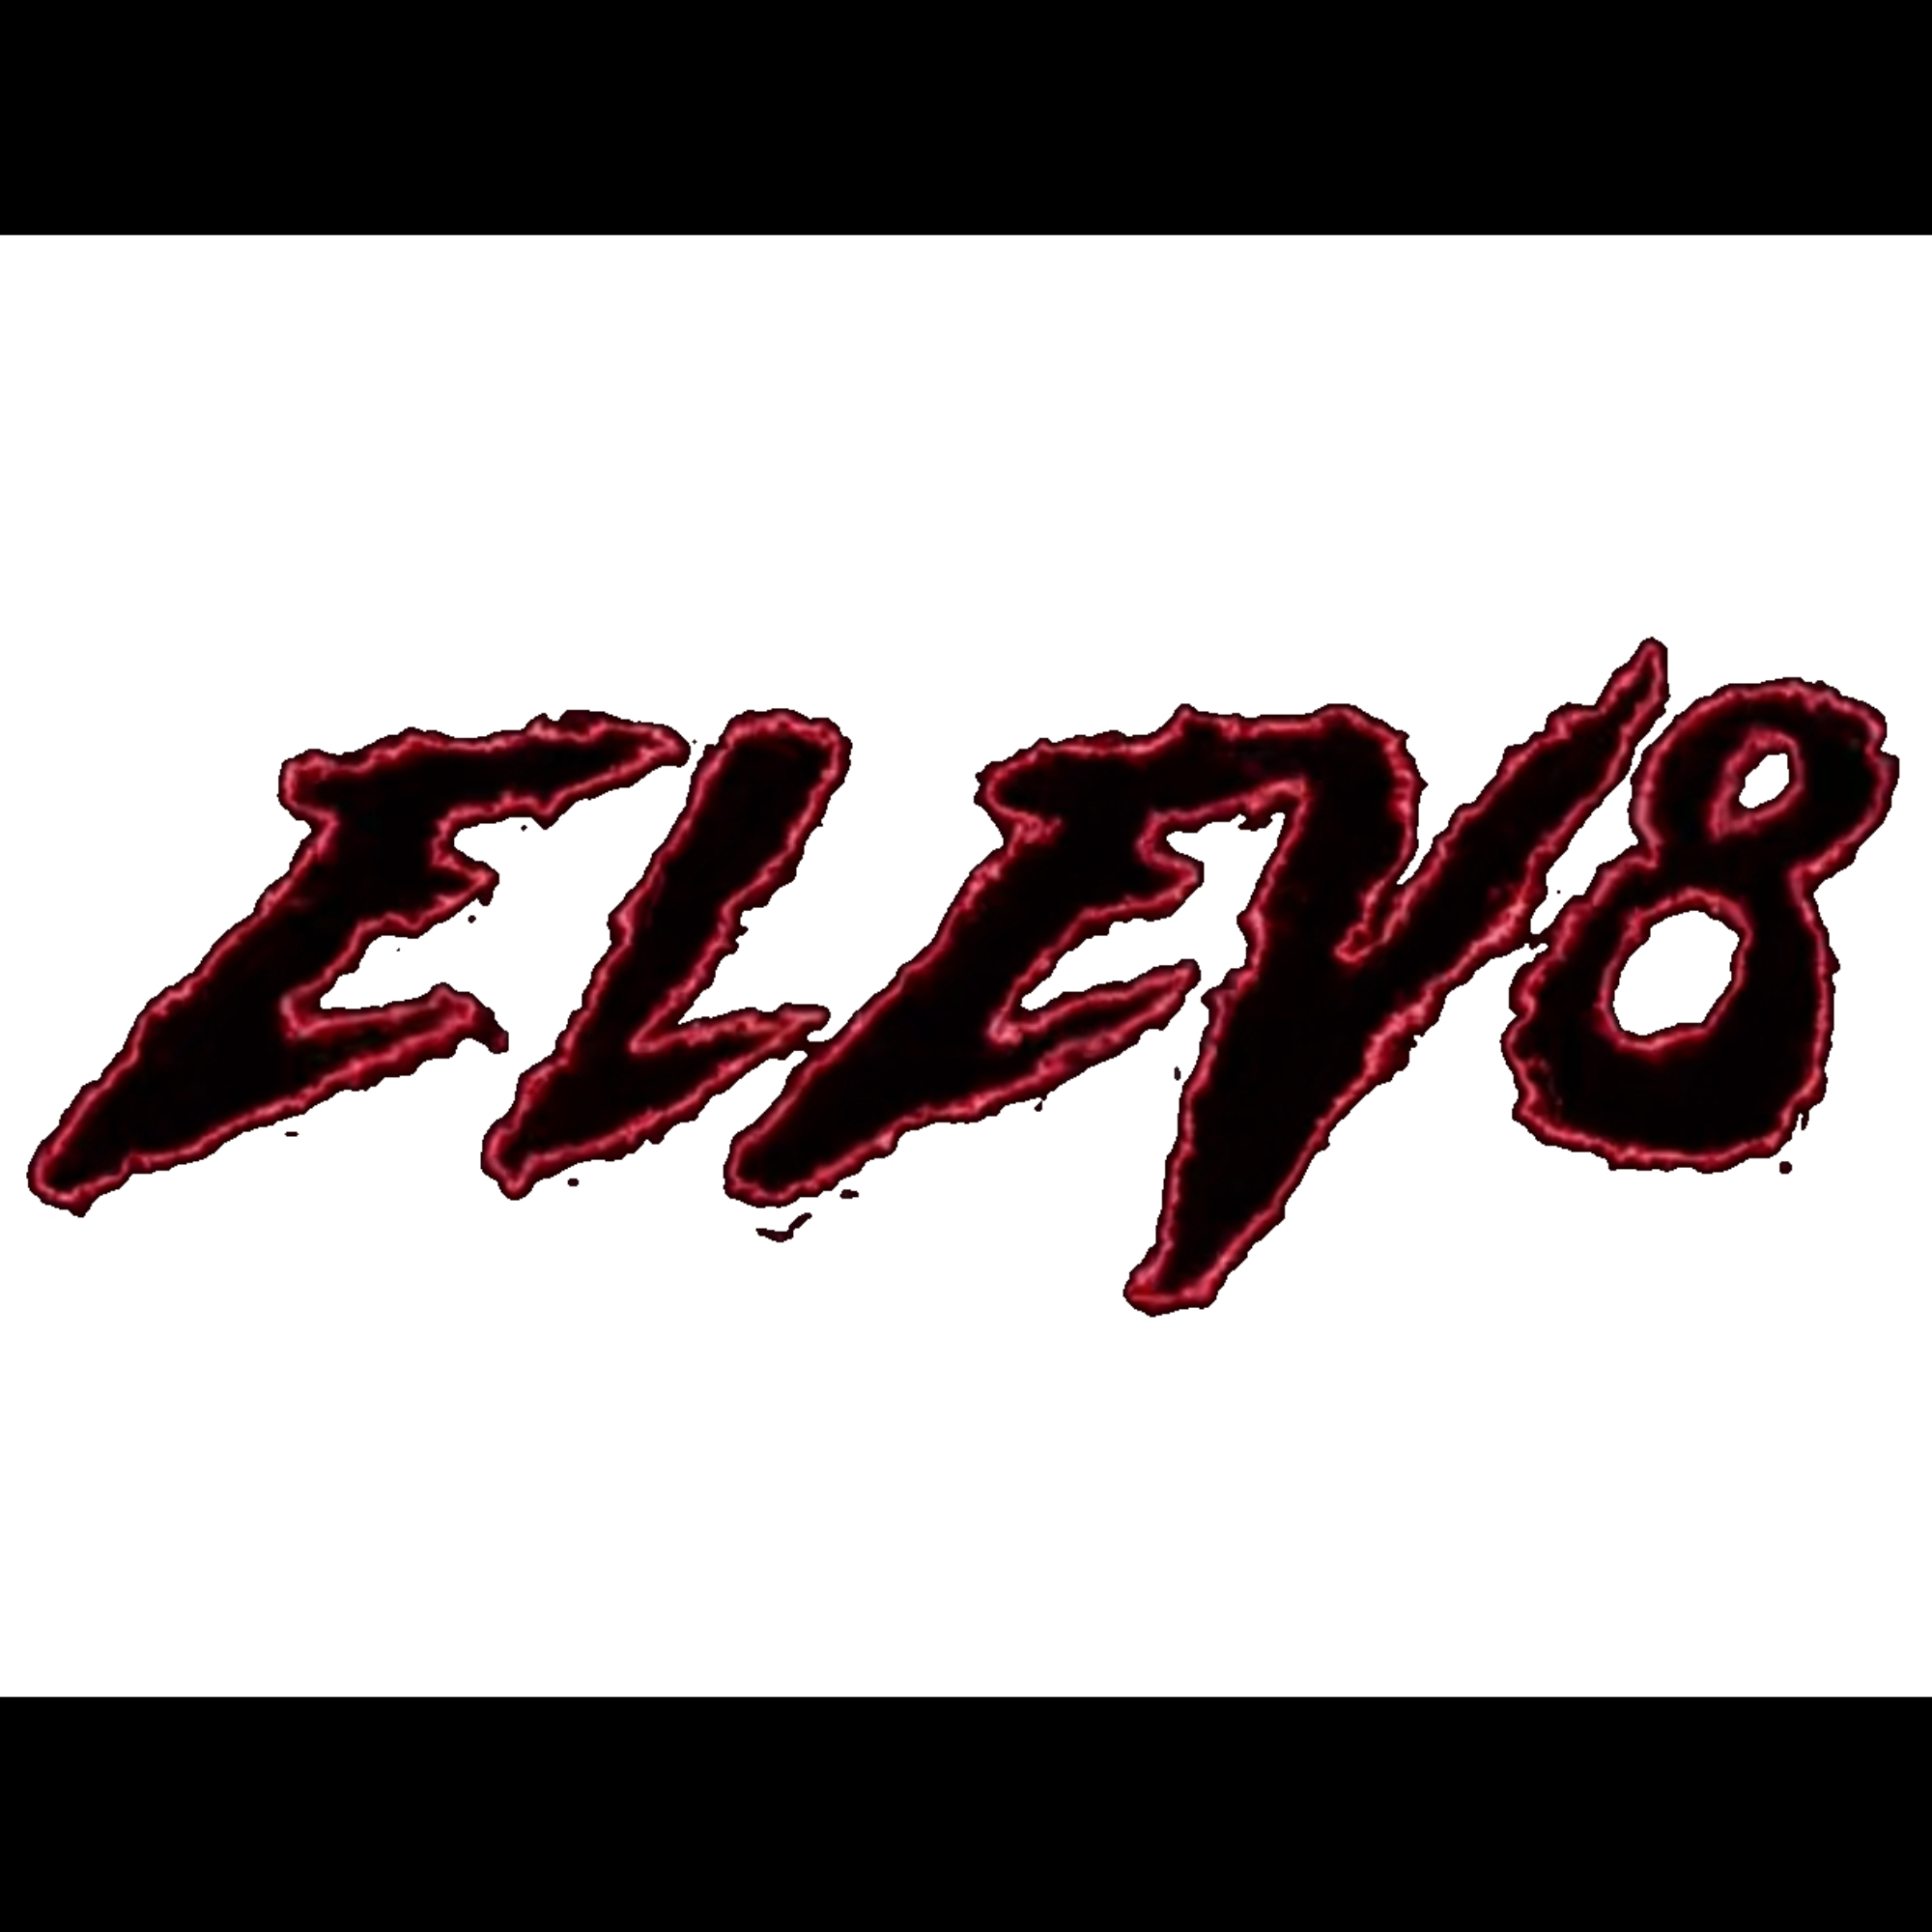 The official logo of Elev8